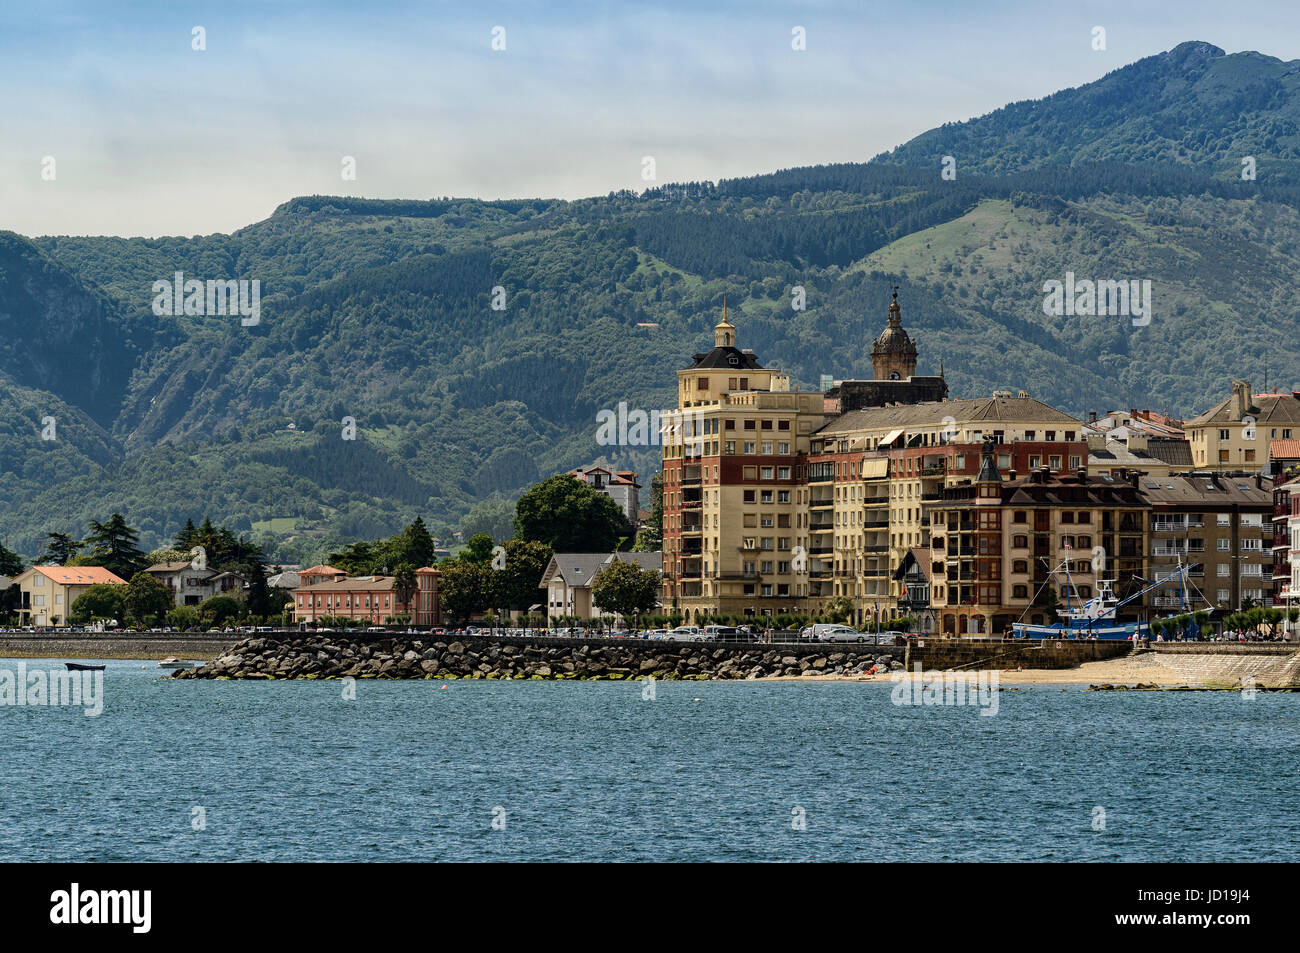 Panoramic view of the village of Hondarribia (Fuenterrabia) Guipuzcoa, Basque country, Spain. Stock Photo